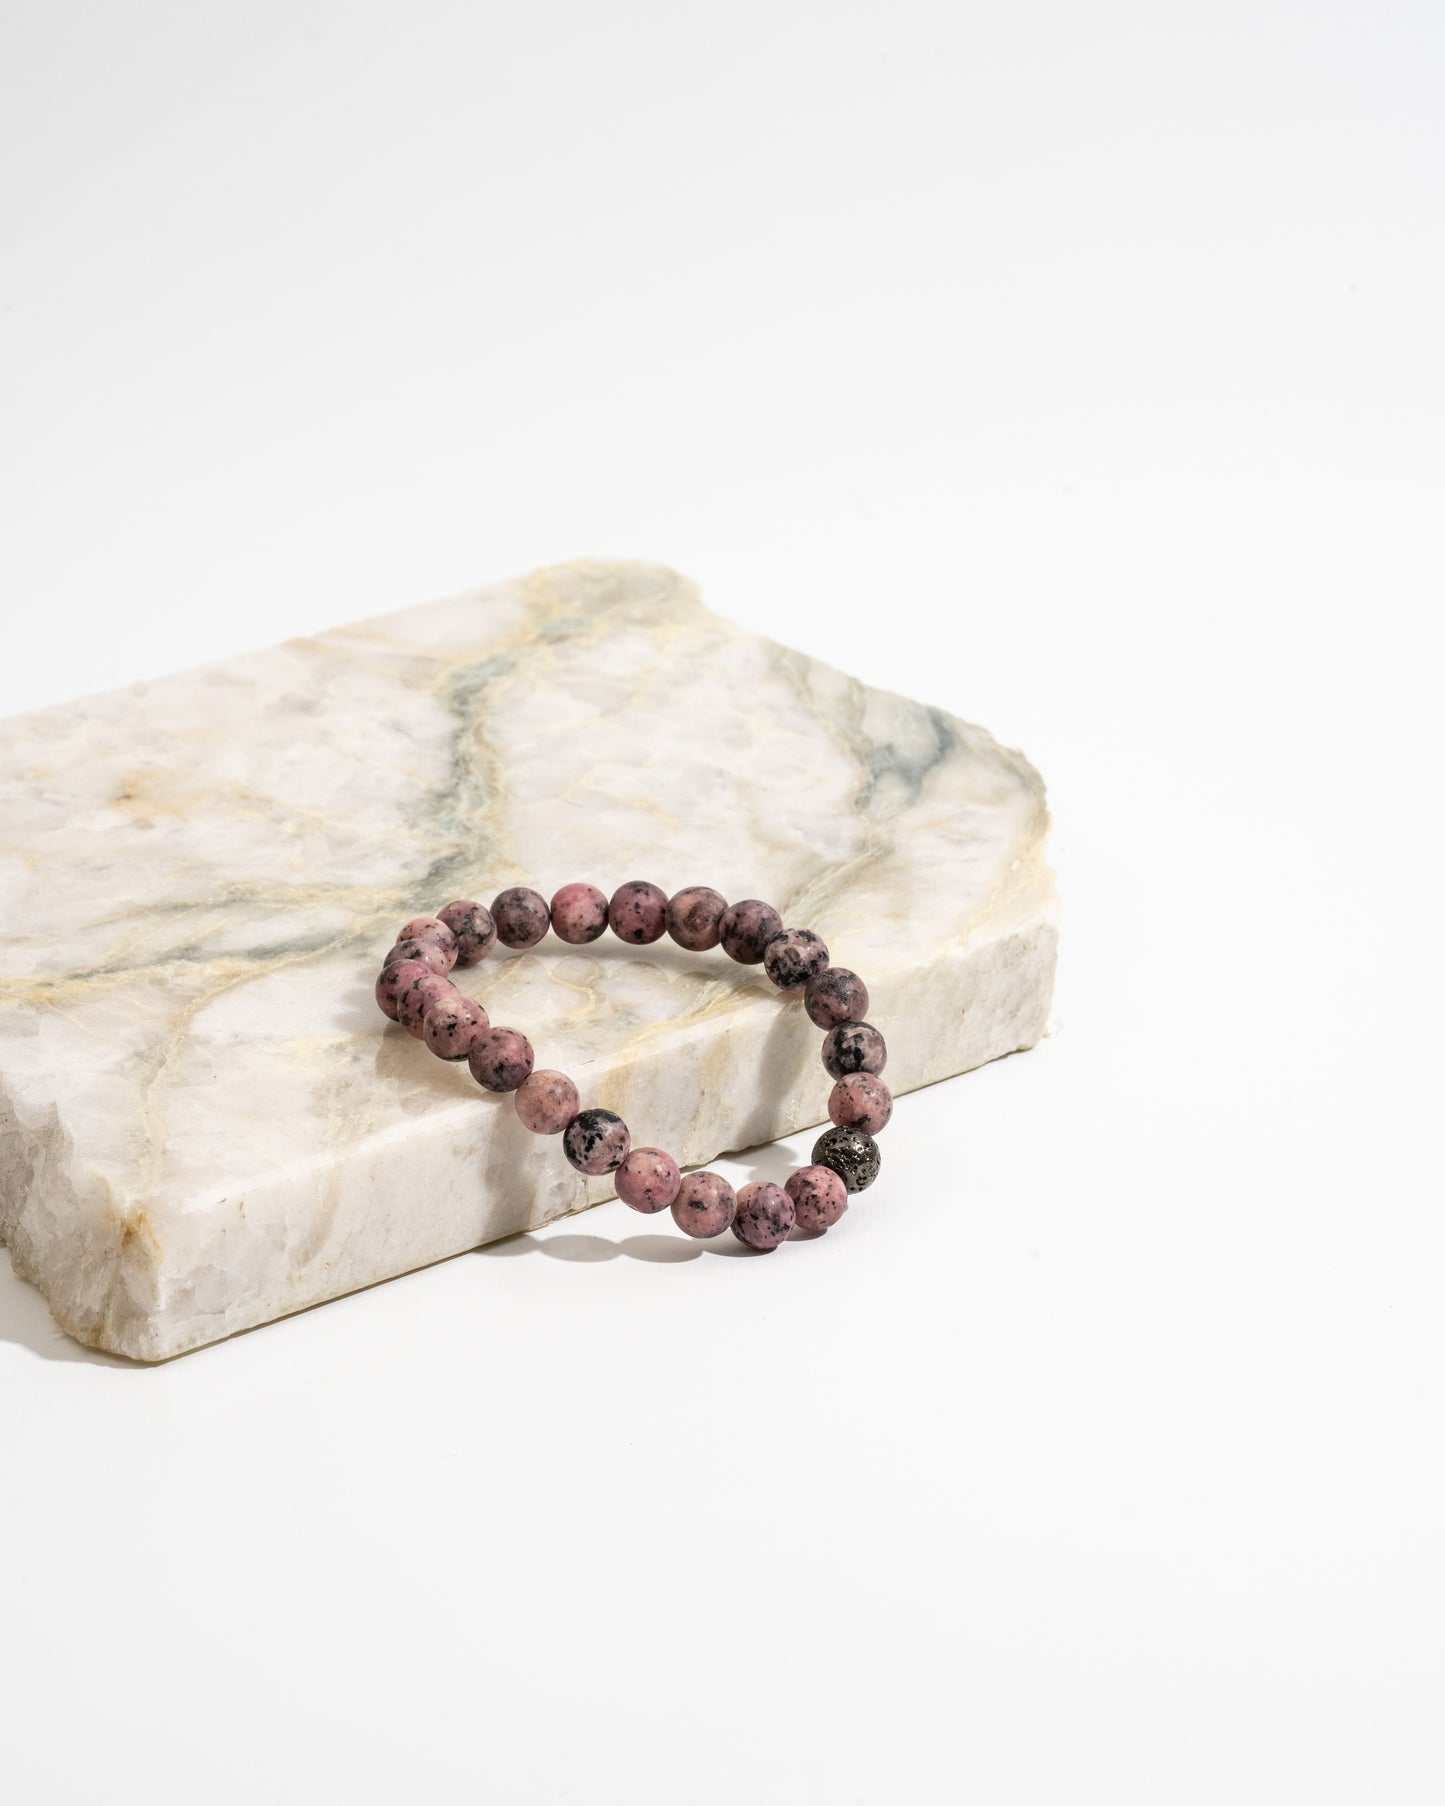 Ethereal Passion Mala Bracelet with Rhodochrosite